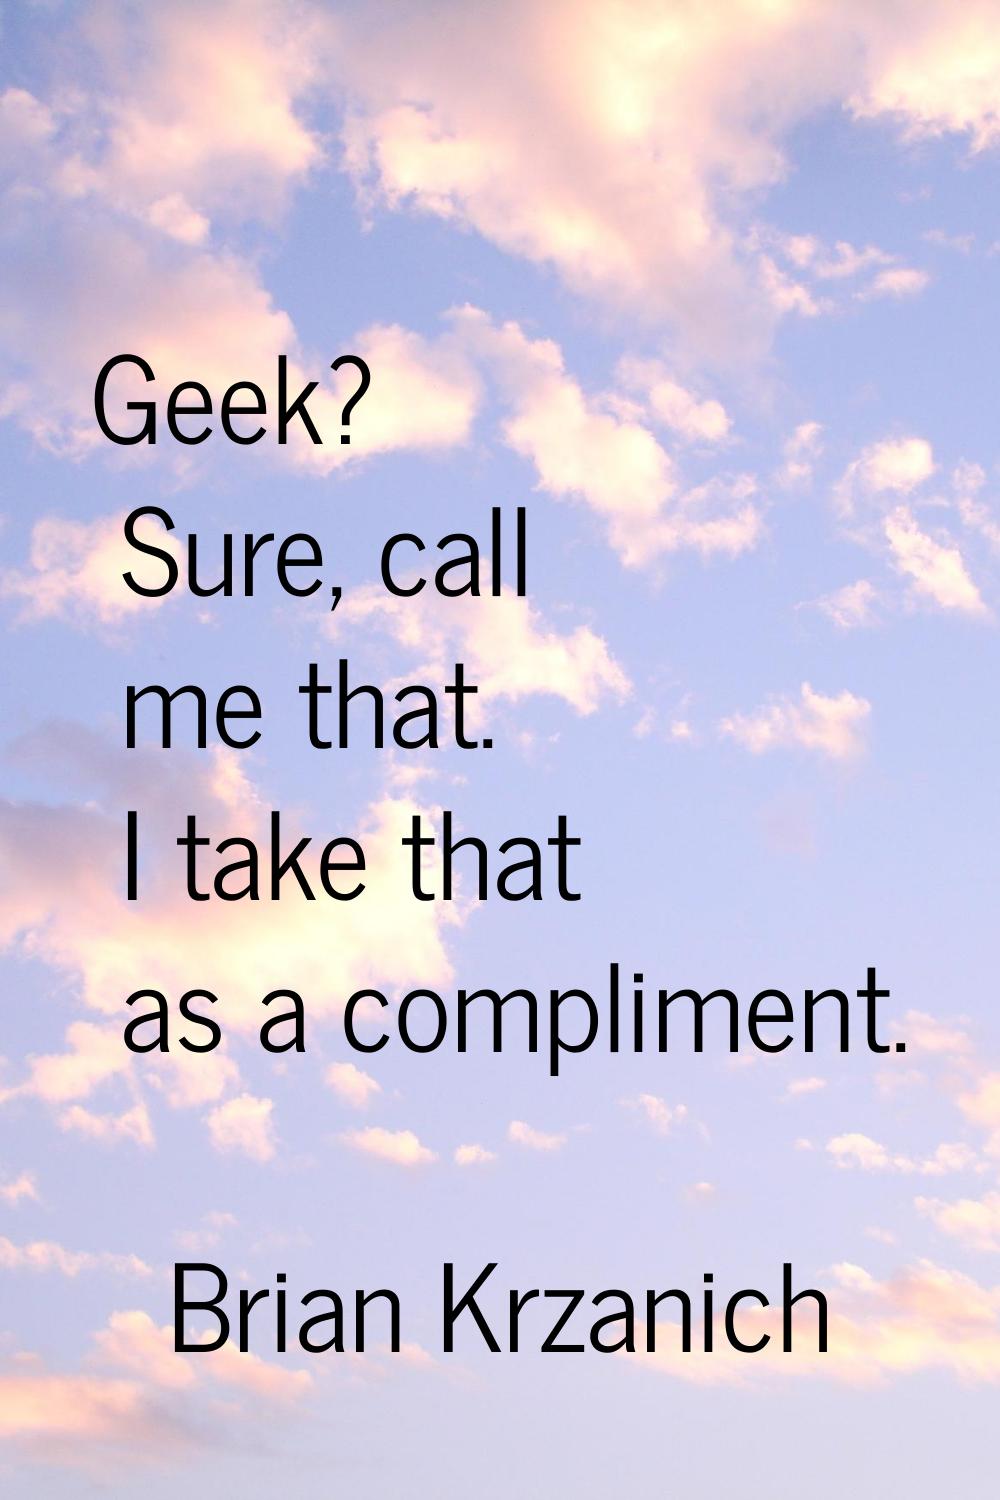 Geek? Sure, call me that. I take that as a compliment.